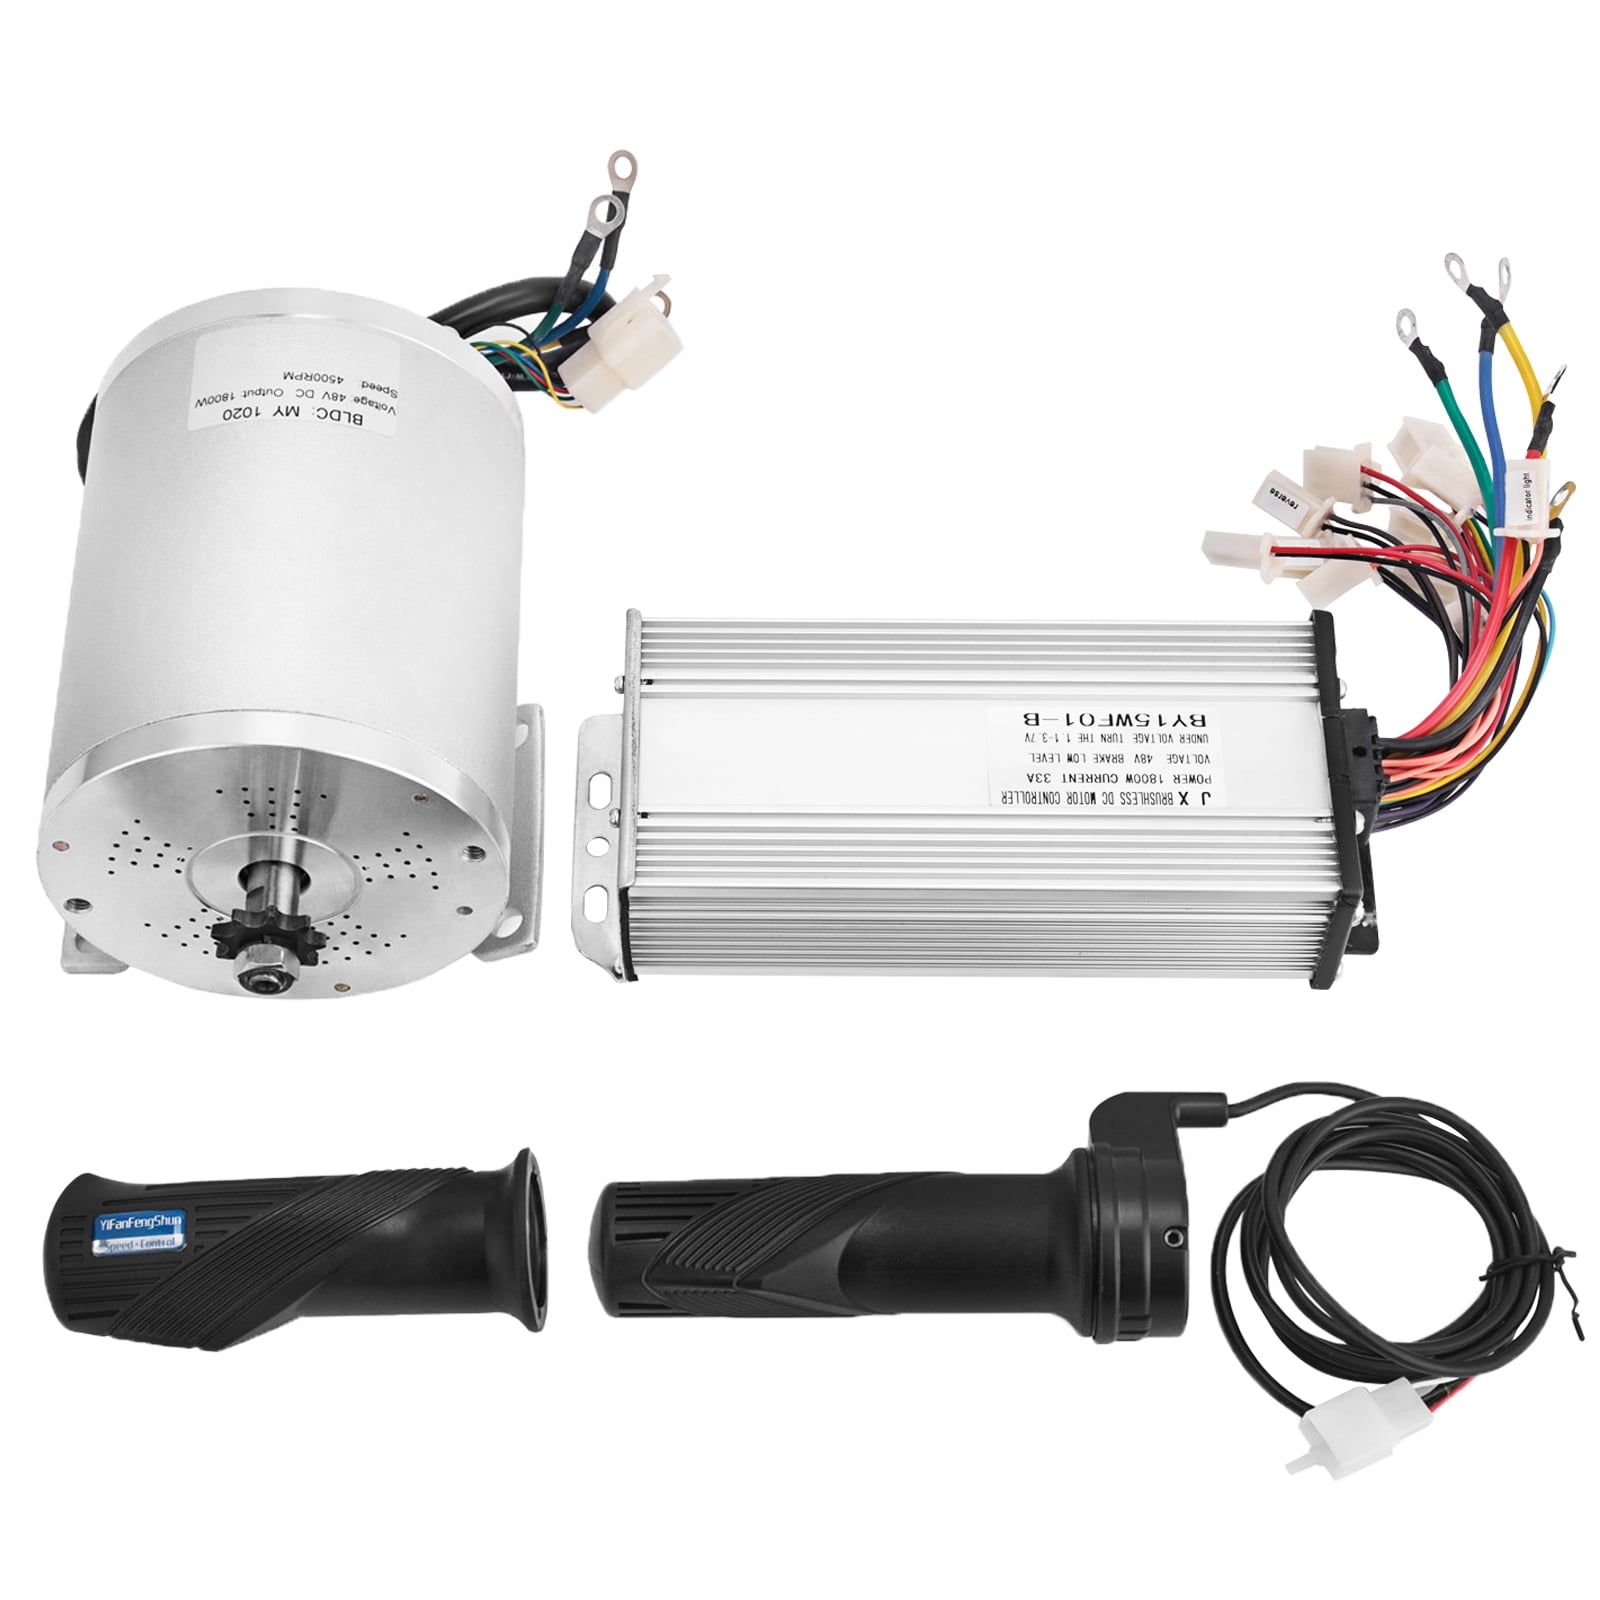 Details about   450 W 24V DC electric motor kit with control box f scooter ebike gokart or DIY 